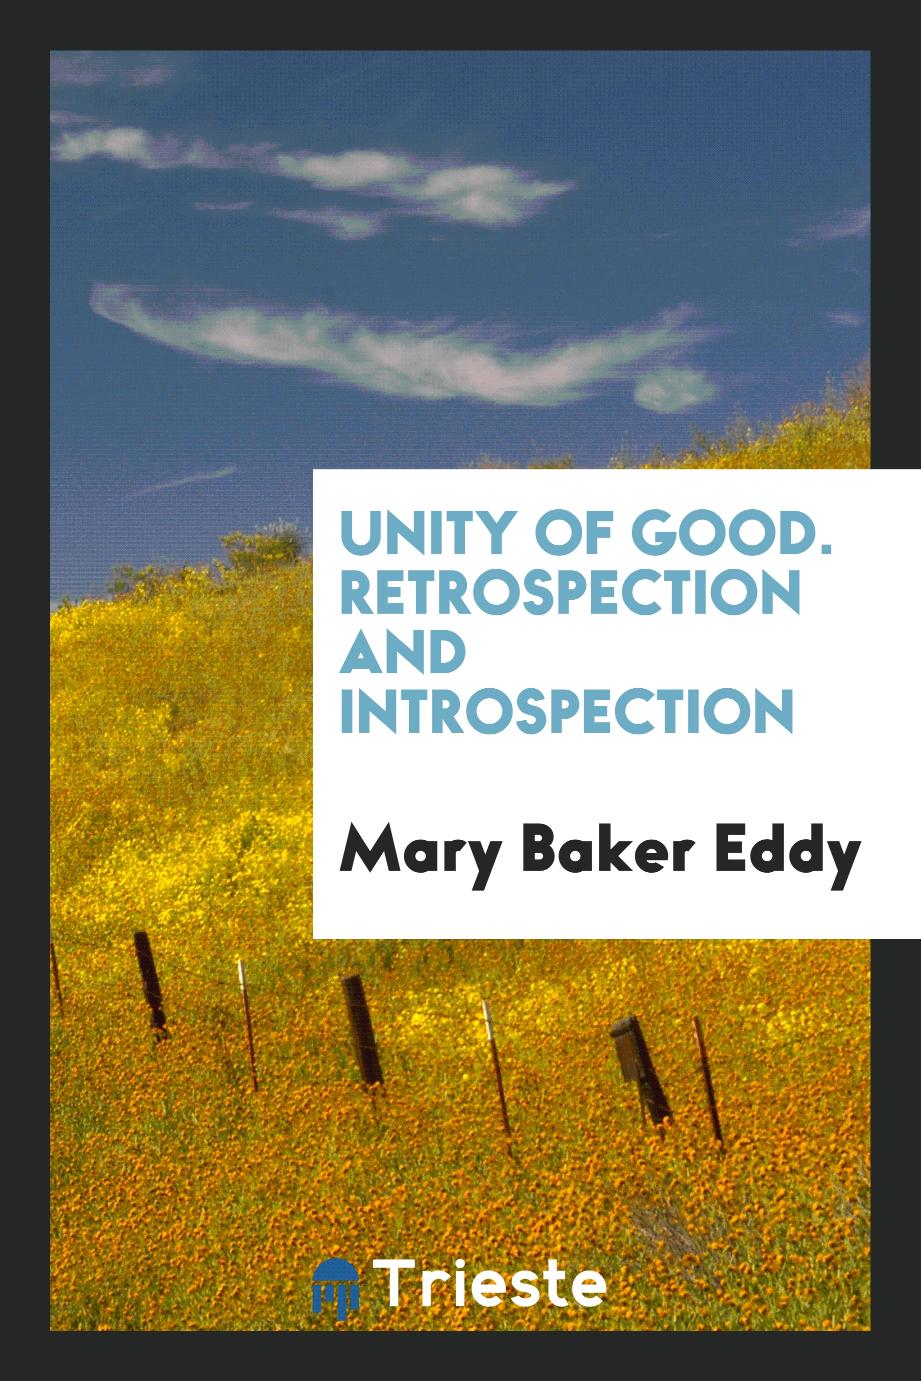 Unity of good. Retrospection and introspection